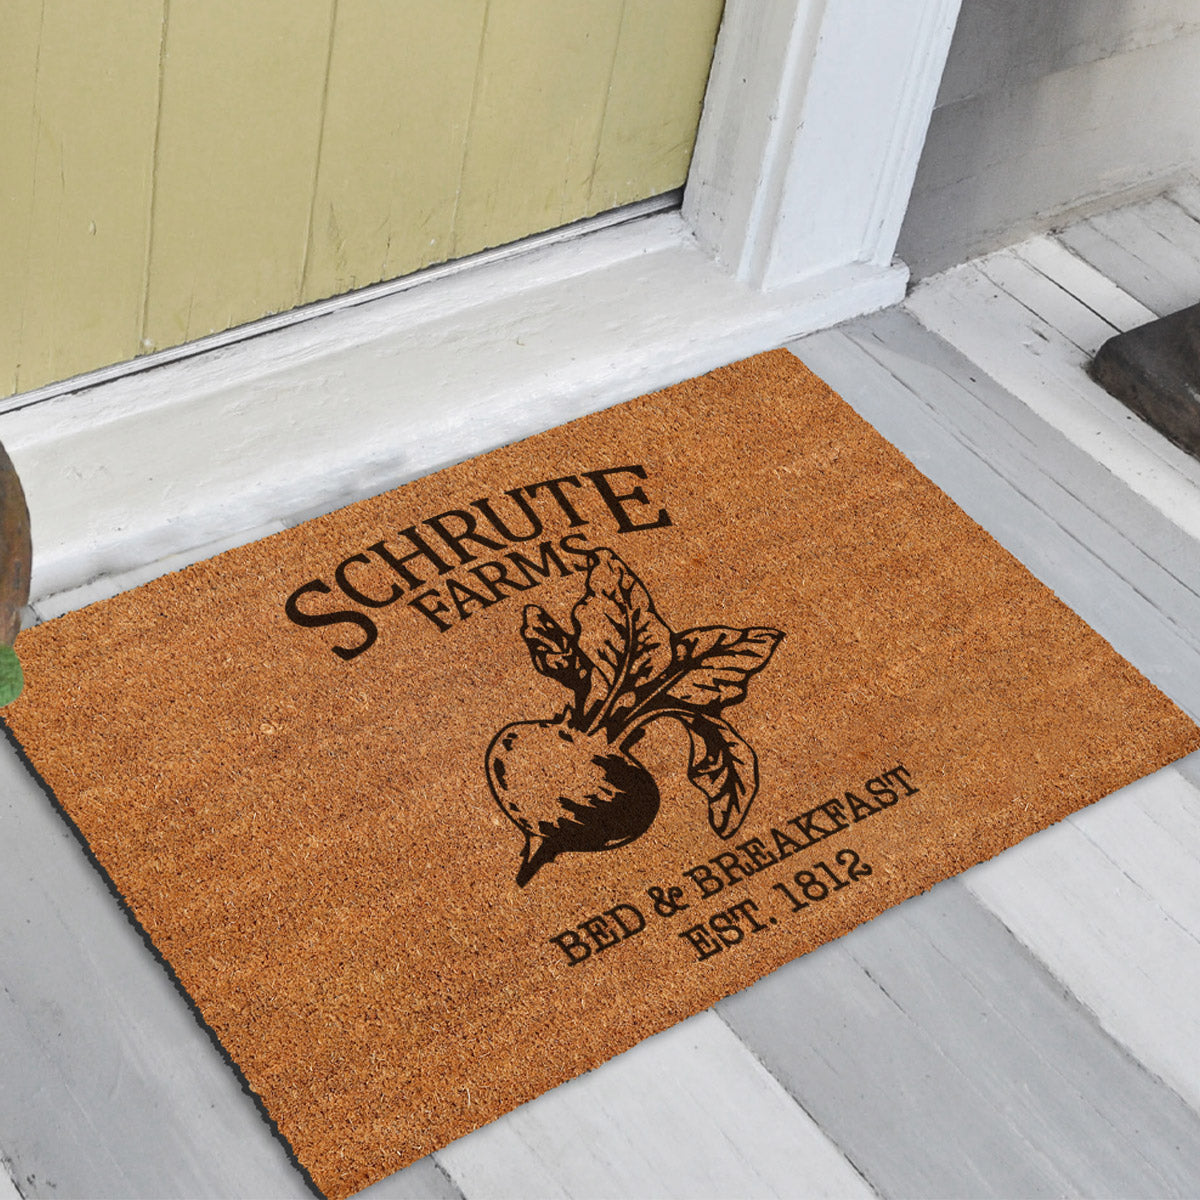 The Office Schrute Farms - Doormat